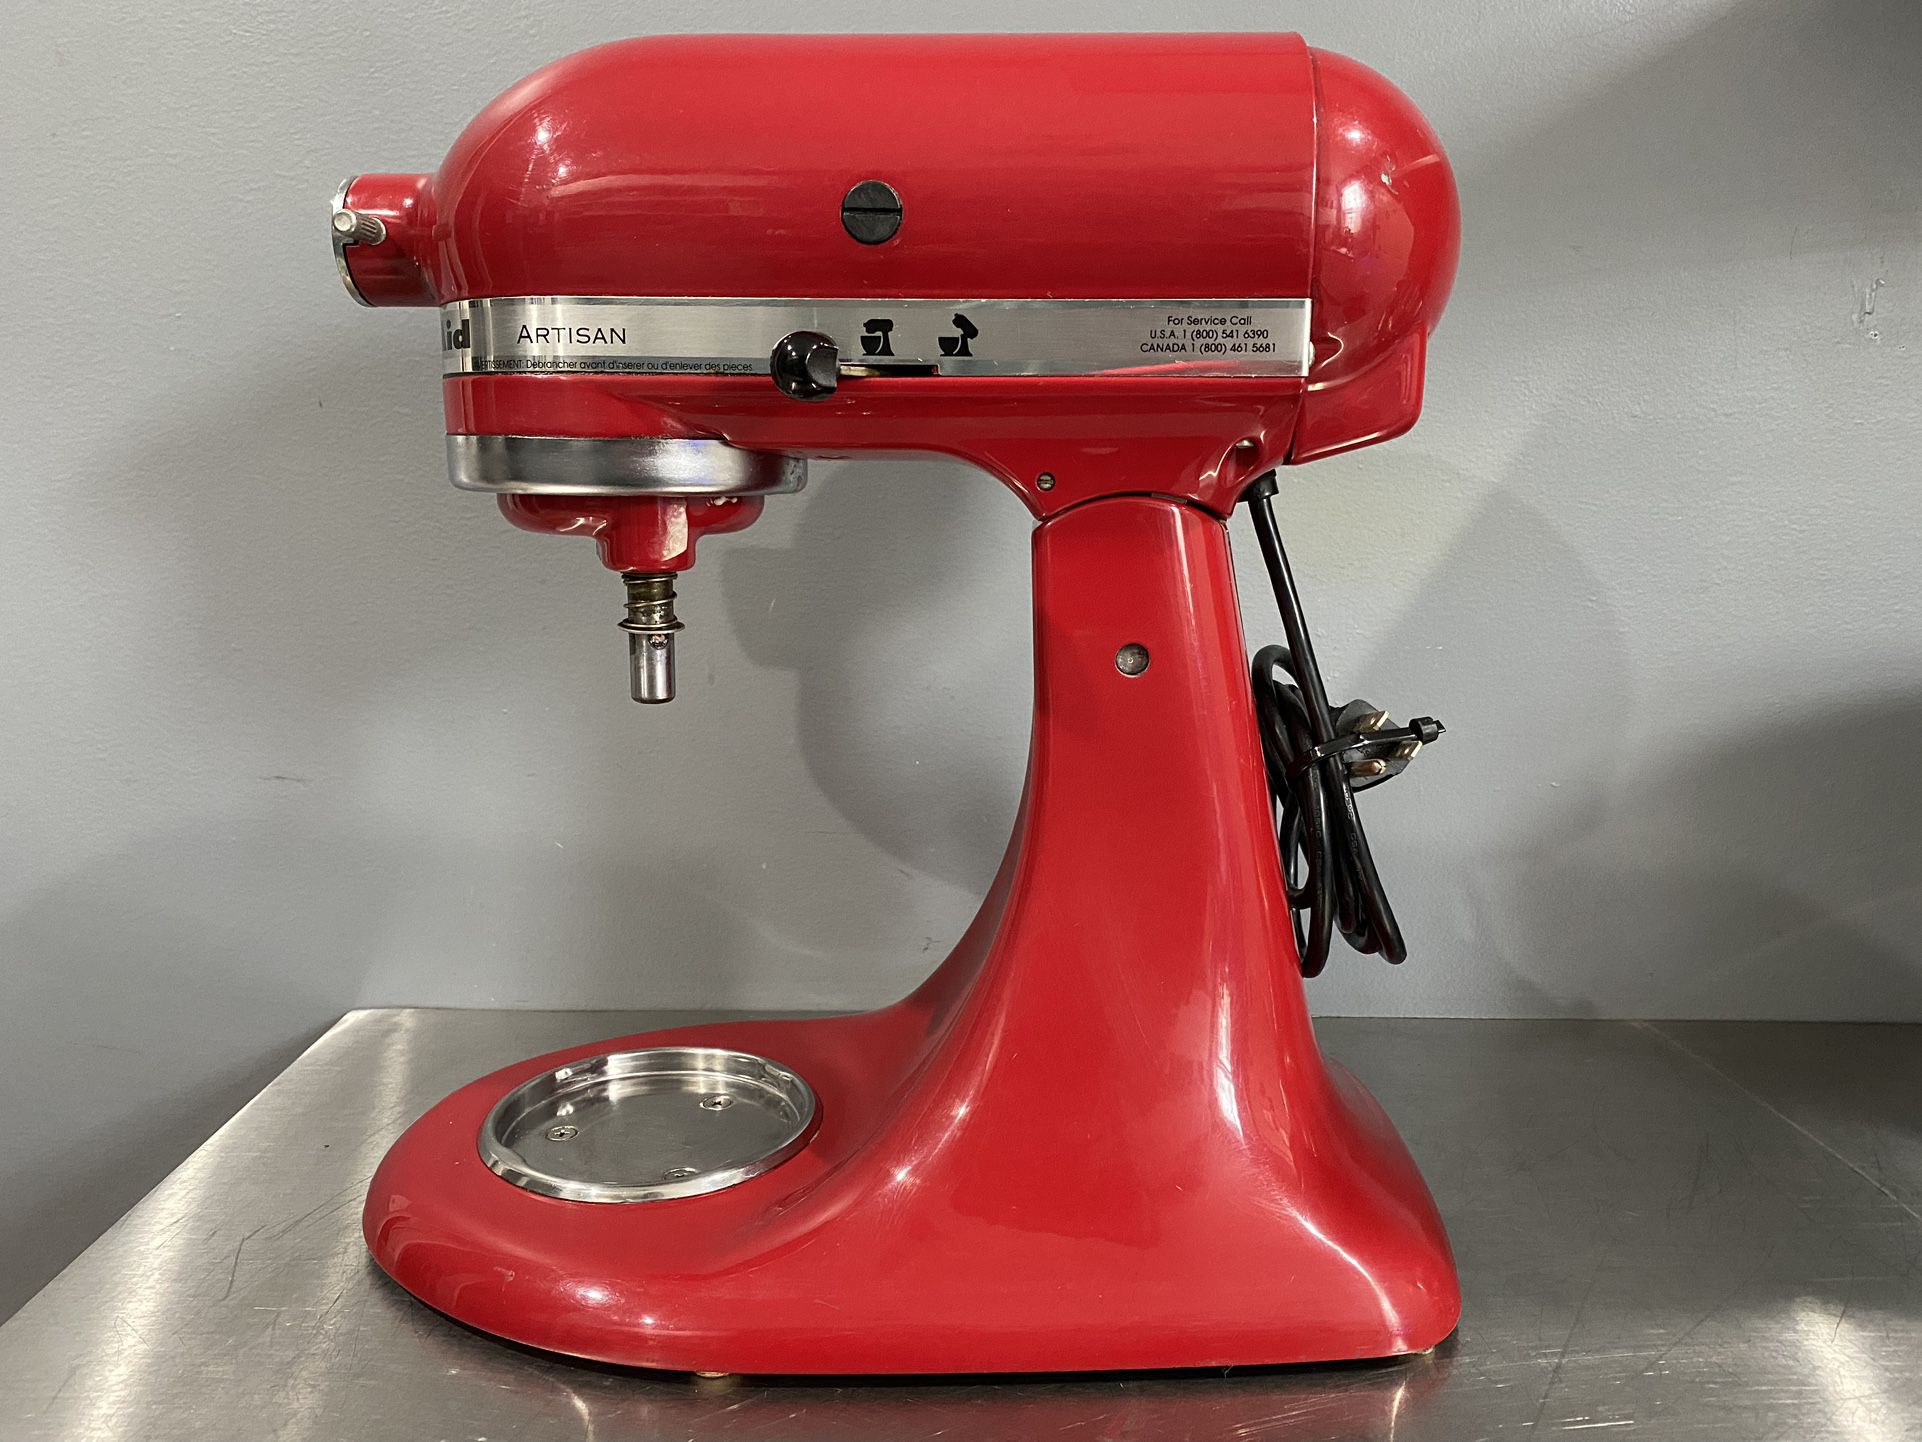 KitchenAid Stand Mixer Artisan KSM150PS ES Espresso for Sale in Queens, NY  - OfferUp